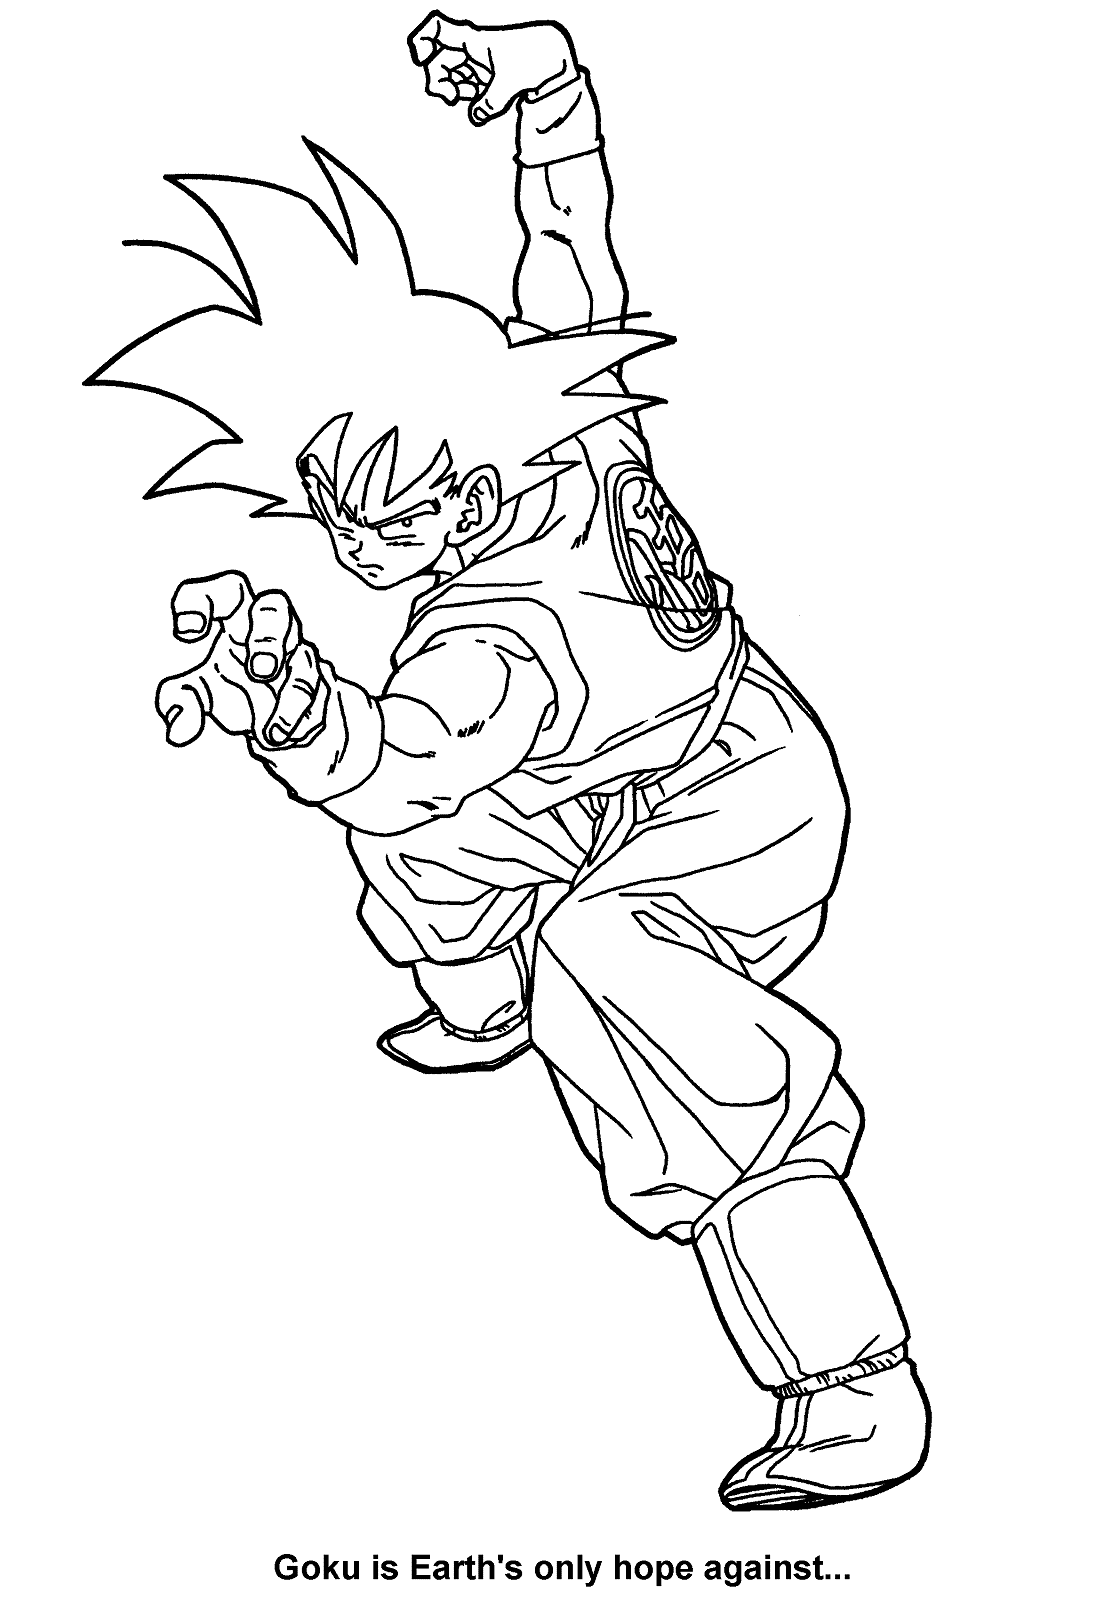 Goku Dragon Ball Z Coloring Pages